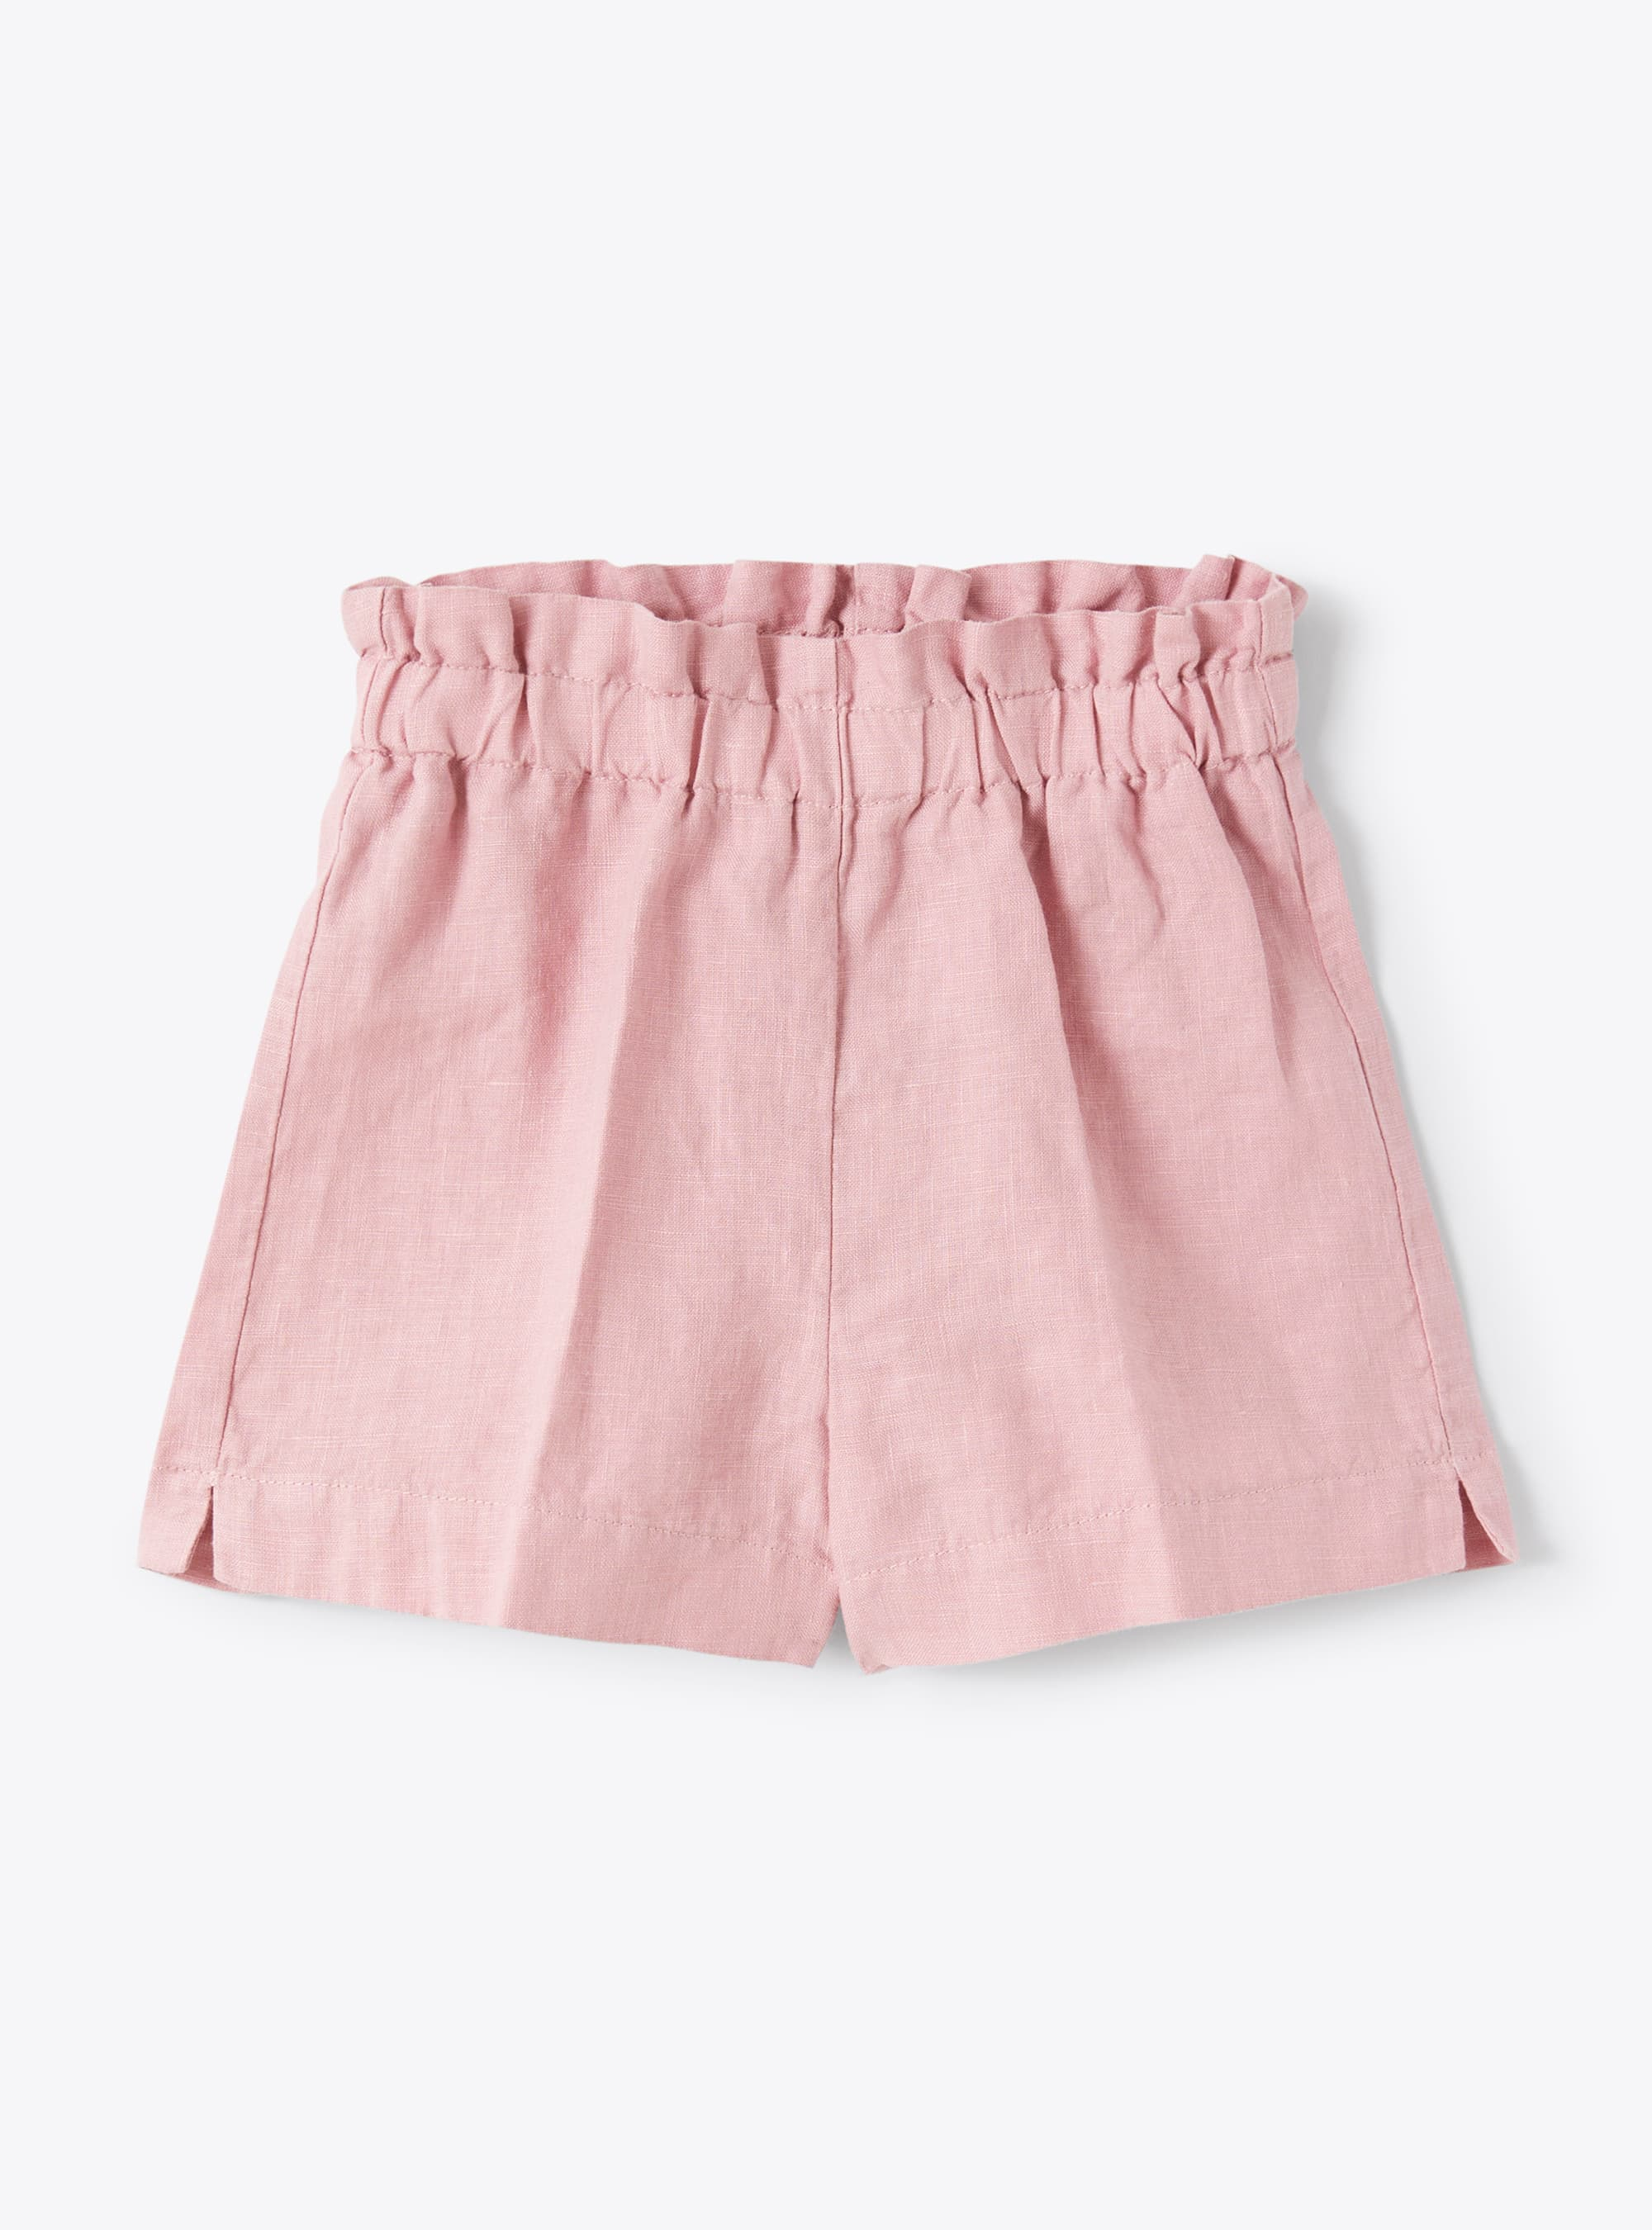 Shorts in pink garment-dyed linen - Trousers - Il Gufo